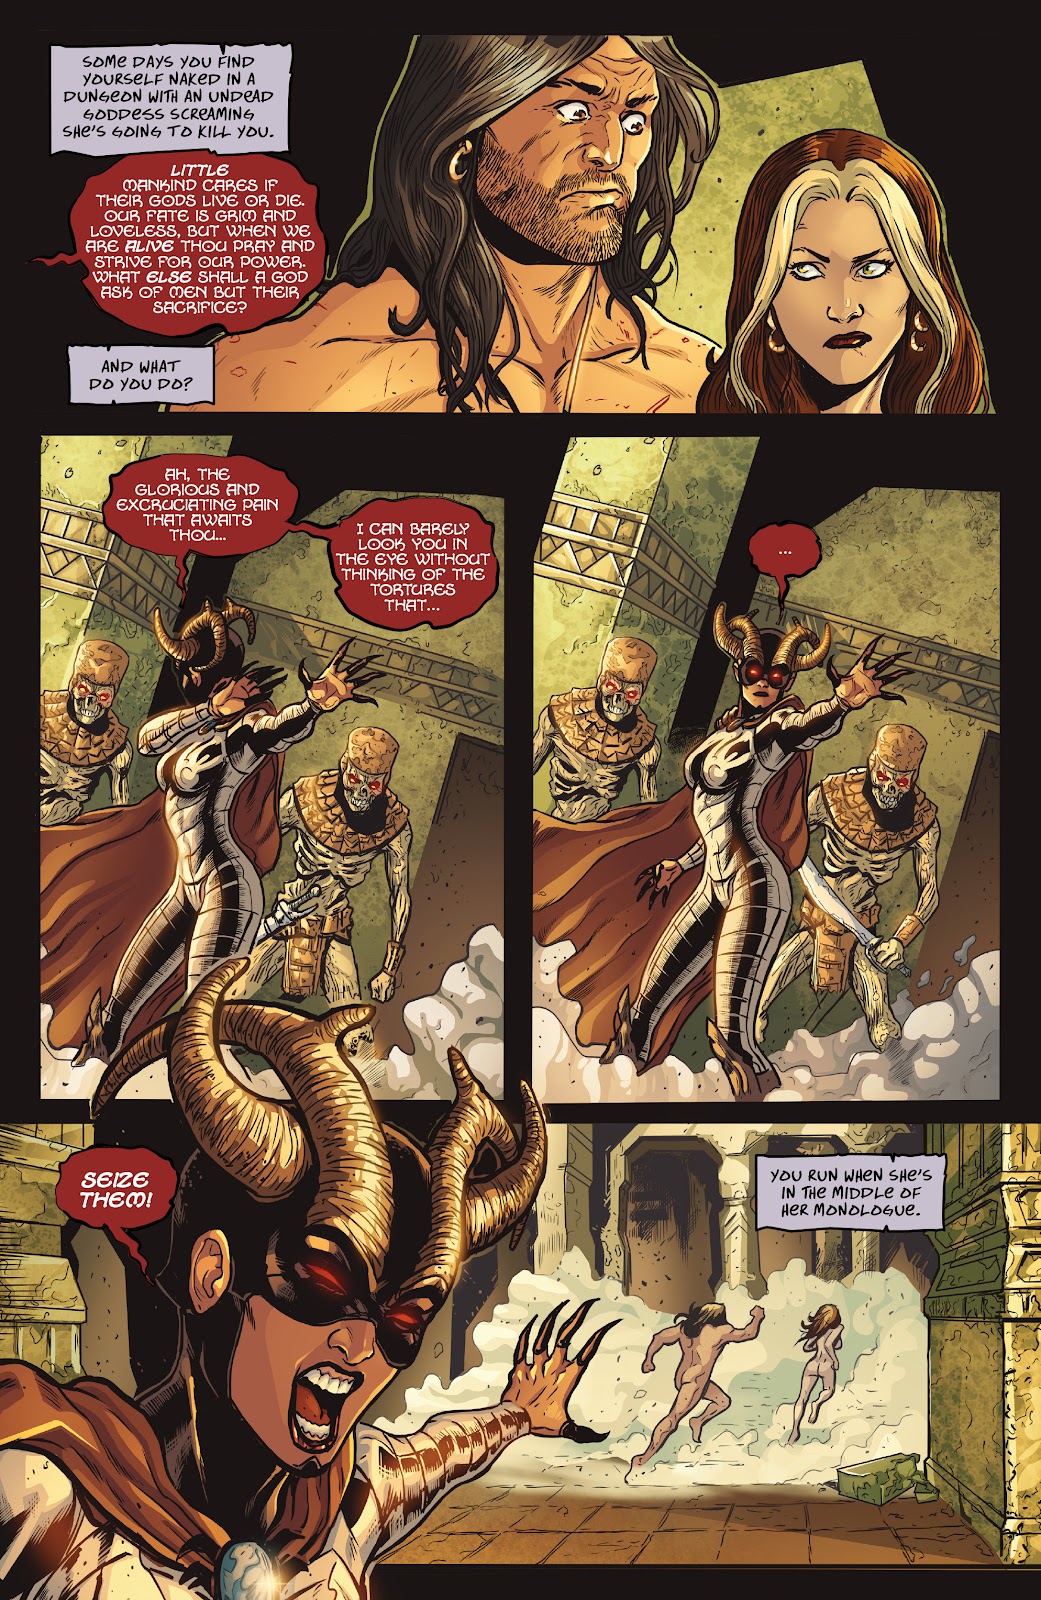 Rogues!: The Burning Heart issue 5 - Page 4